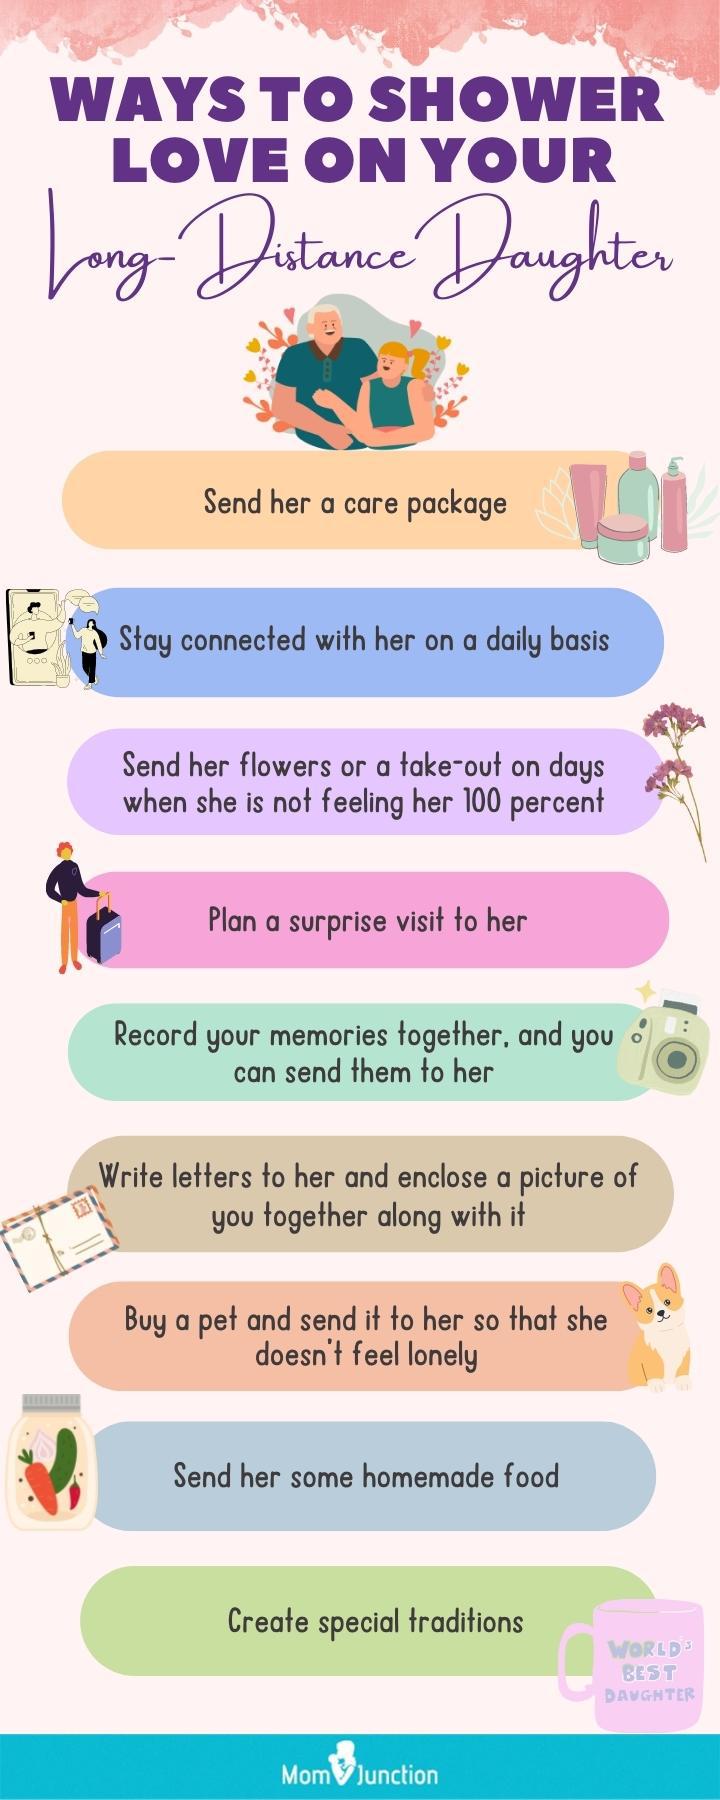 ways to shower your love on daughter (infographic)